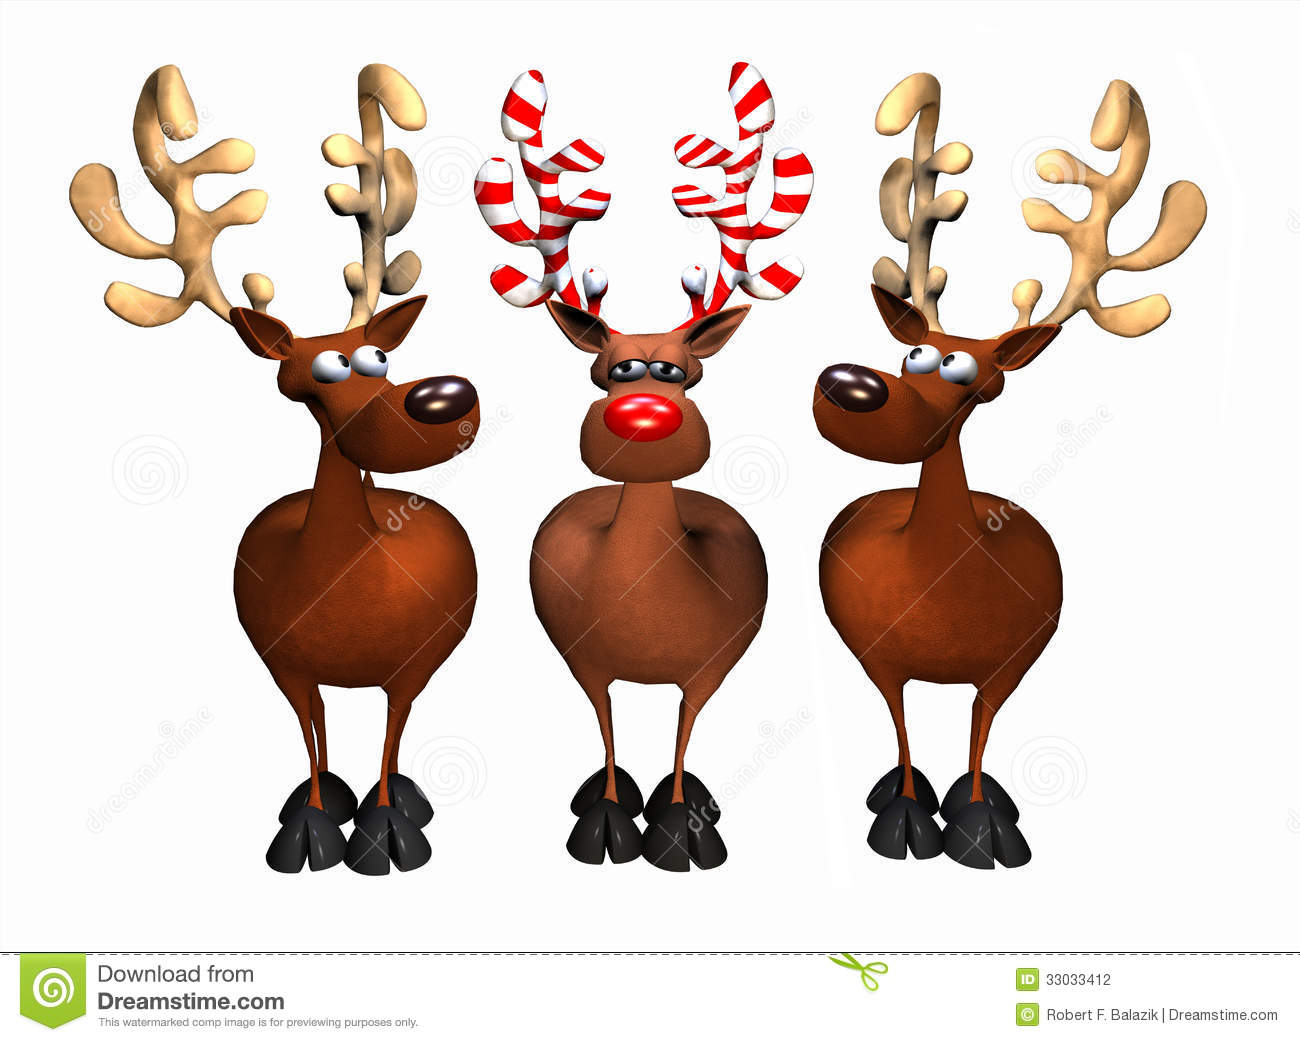 Illustration Depicting Three Reindeer One With Candy Cane Antlers